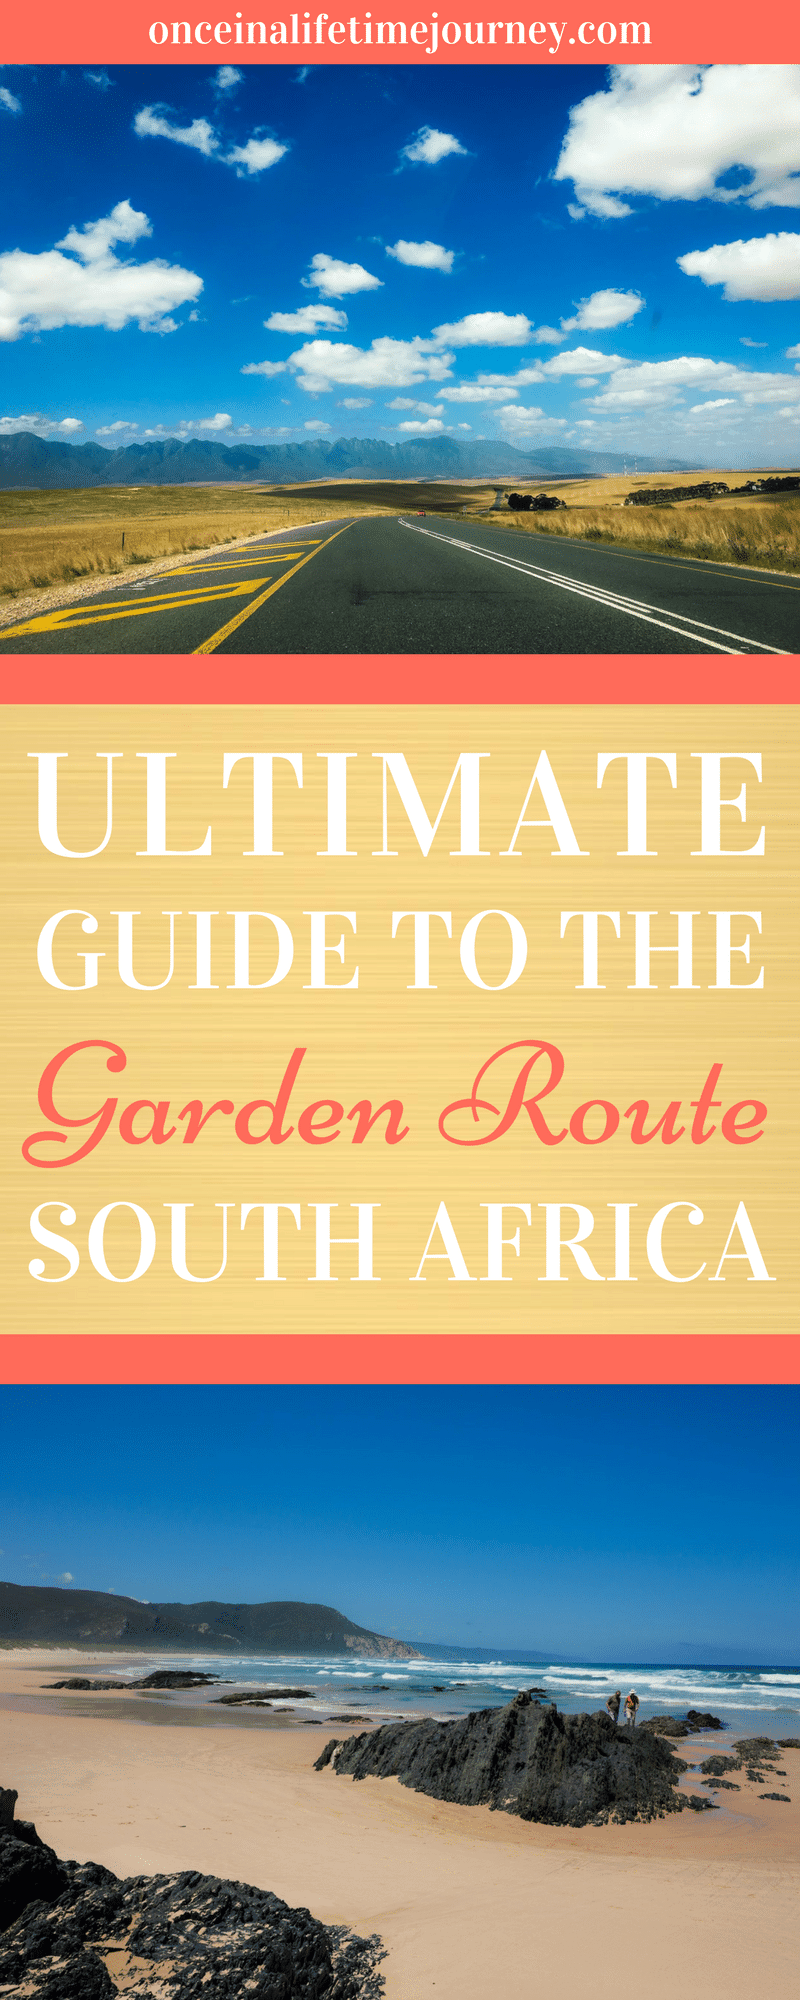 Definitive Guide To The Garden Route South Africa Maps Included